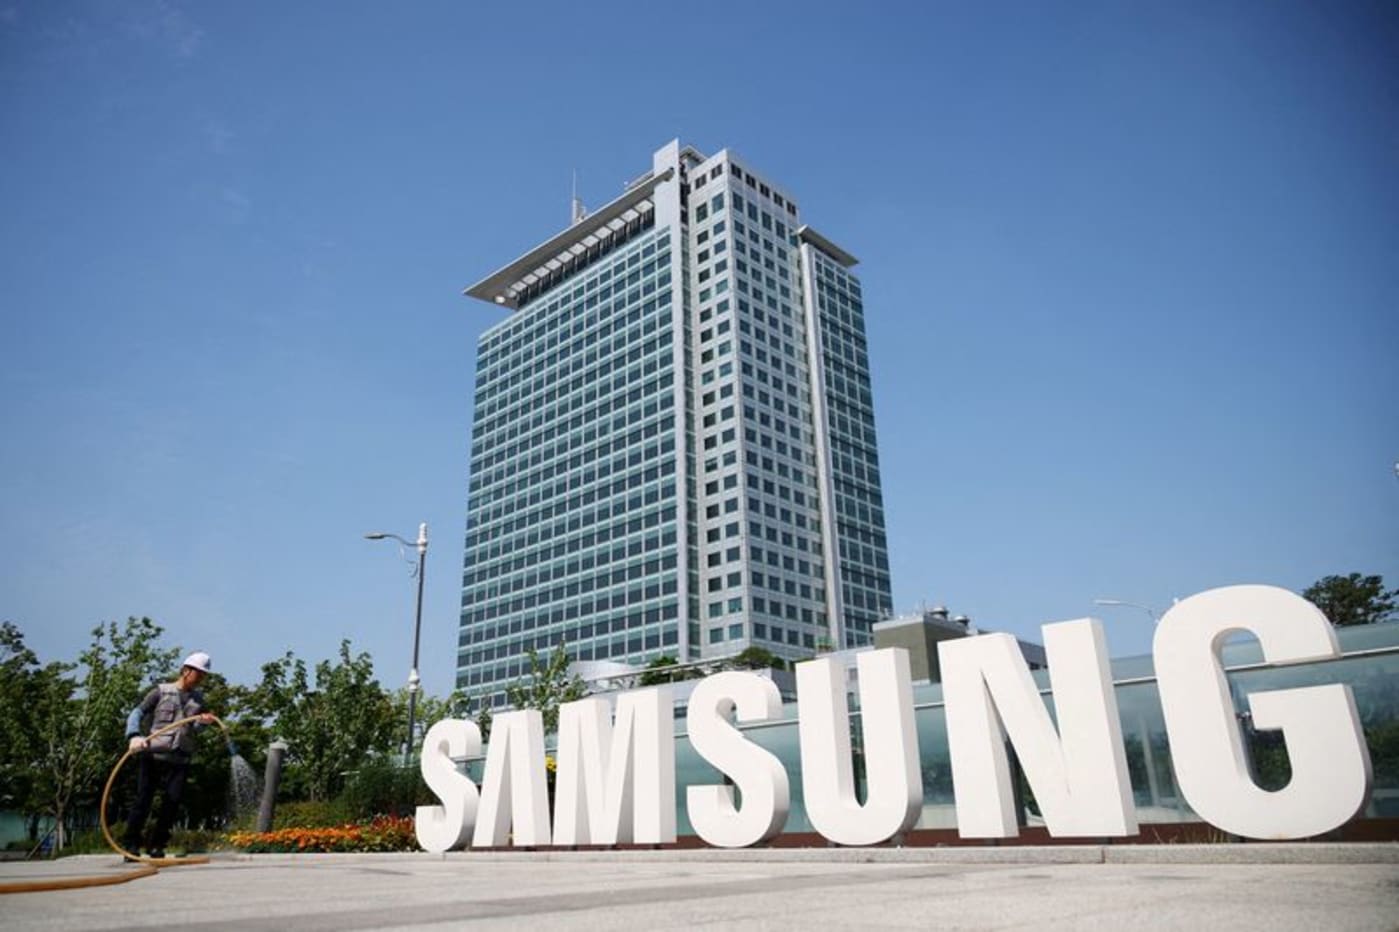 Samsung is once again the leader in global smartphone shipments